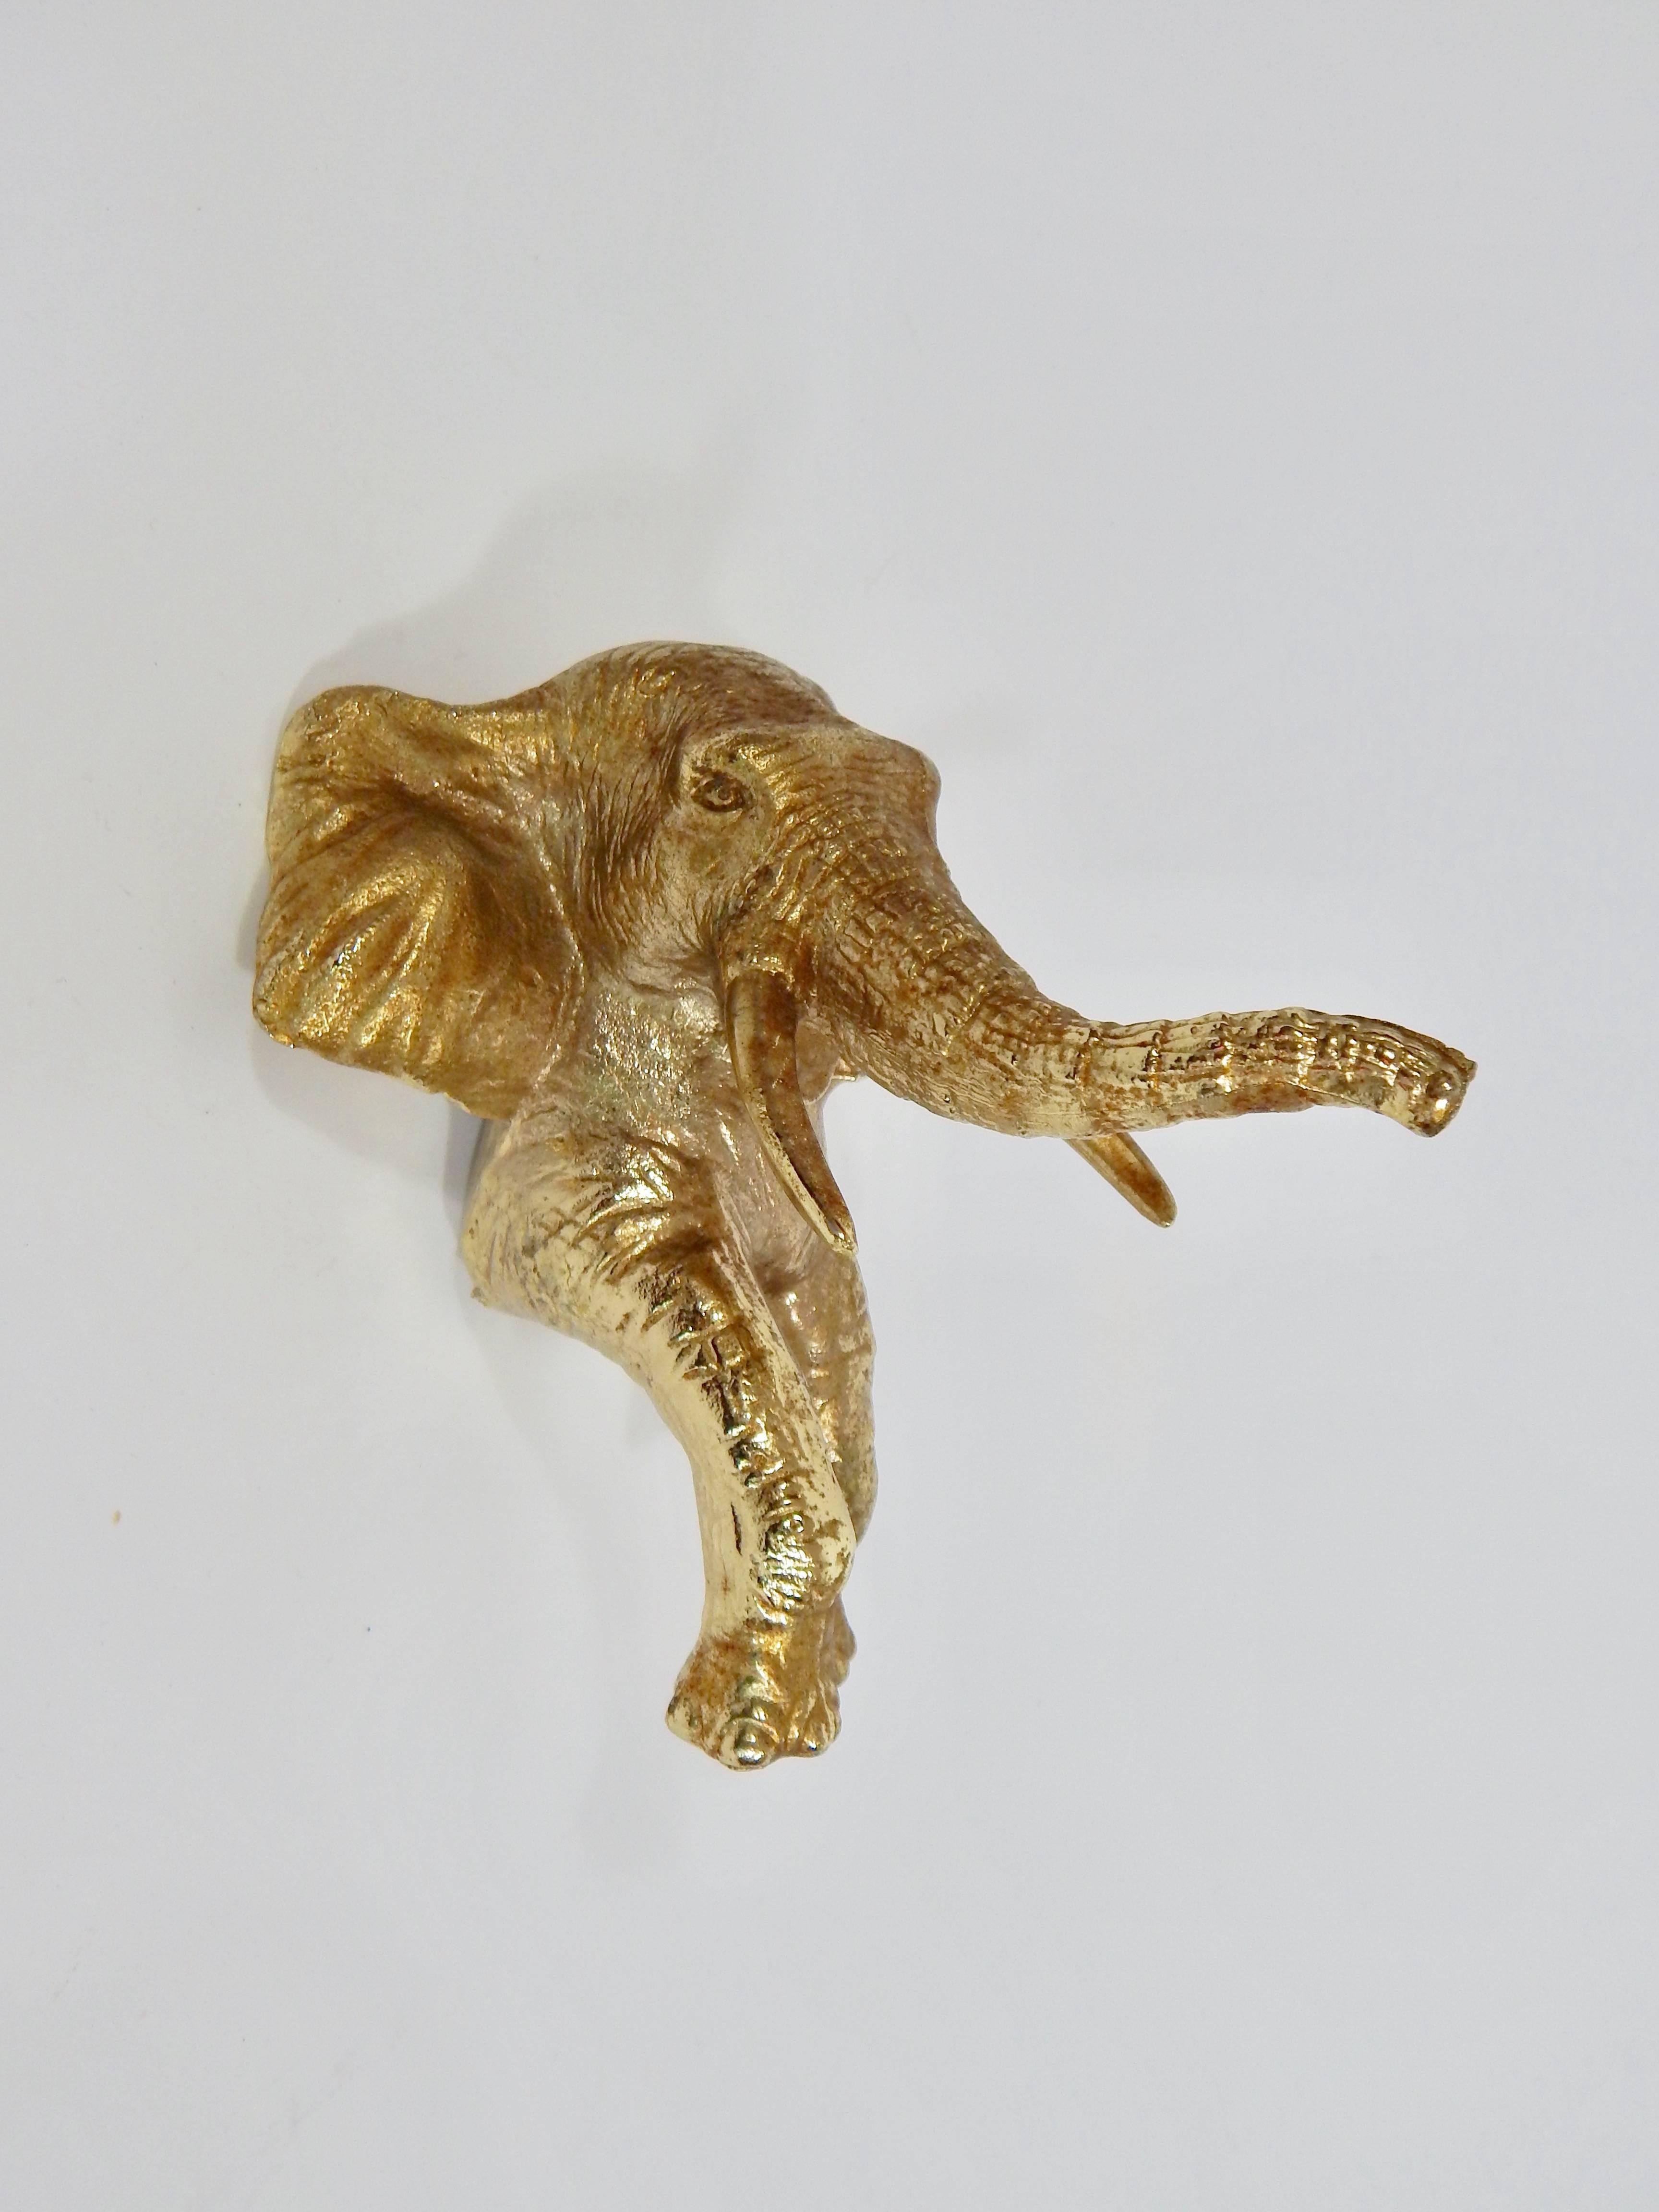 Gold/gilded cast iron wall sculpture/ door mount/handle of the front half of an Elephant. Signed Don Winton Pasadena 1959 the left ear and J. Connor 1959 on the right ear. 

Don Winton was a freelance sculptor from 1952 until his death and